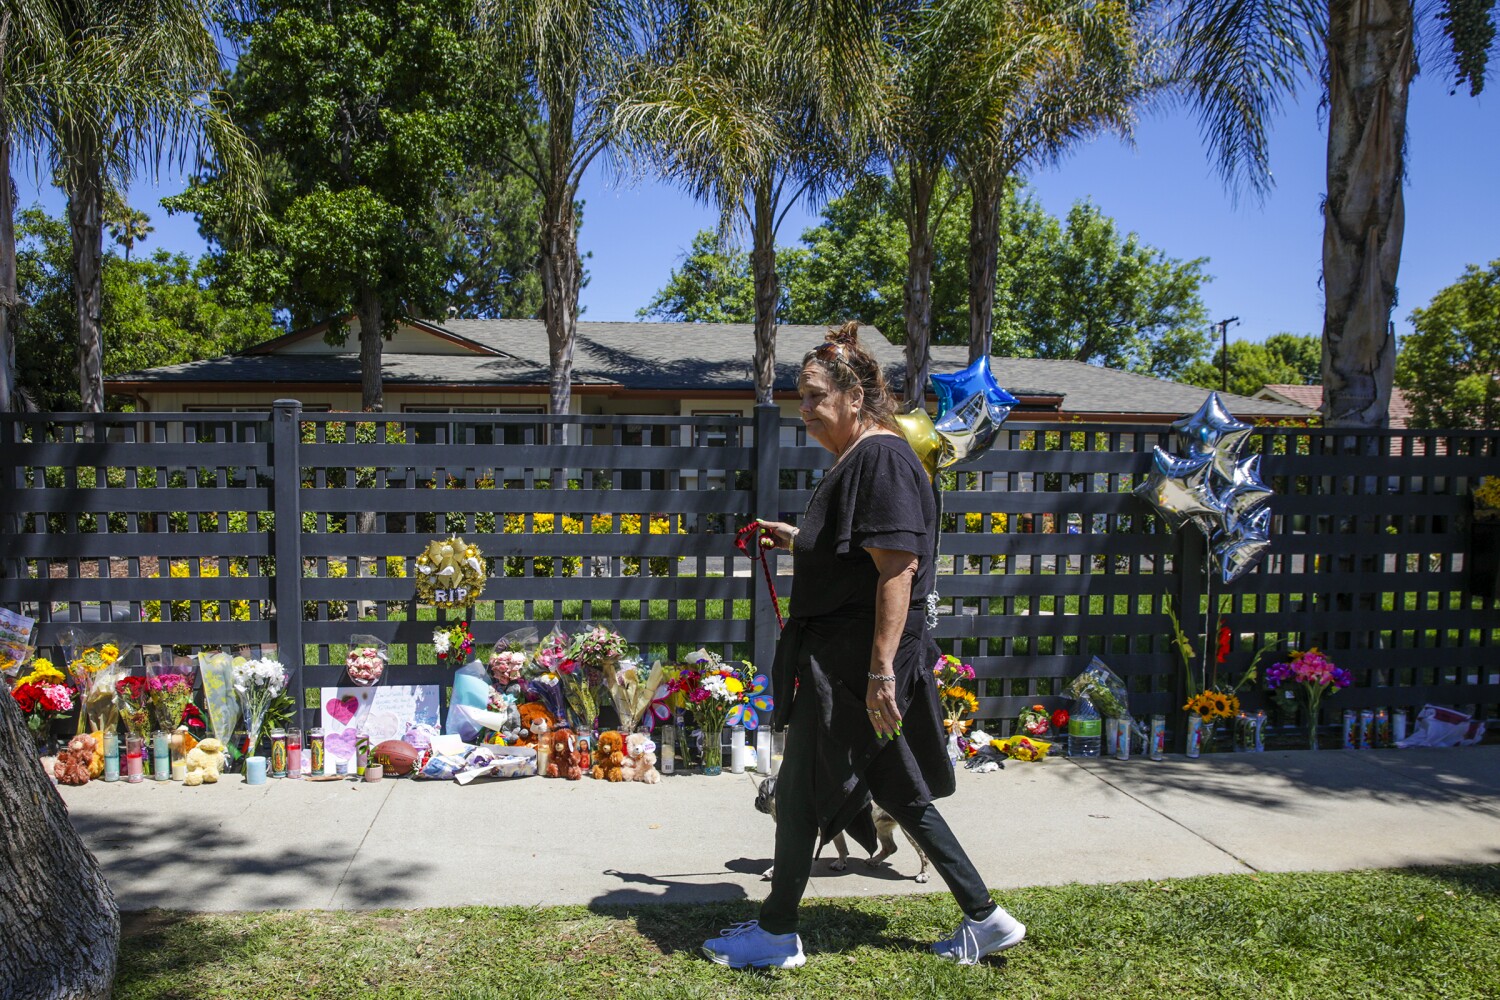 LAPD overlooked 3 dead children inside home for 7 hours after mother taken away